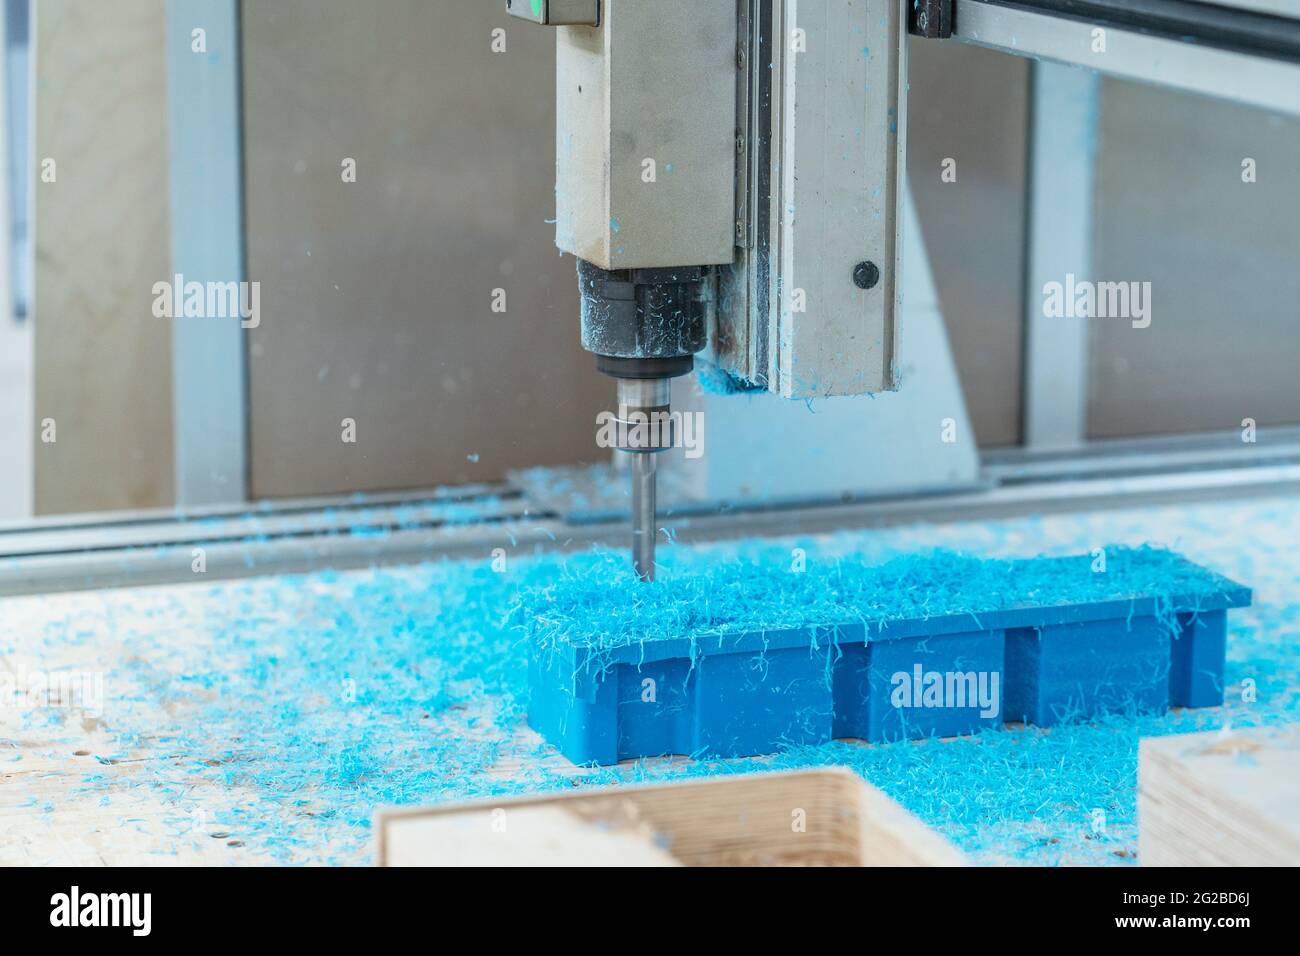 CNC drill machine cutting mold from plastic, close up. Stock Photo